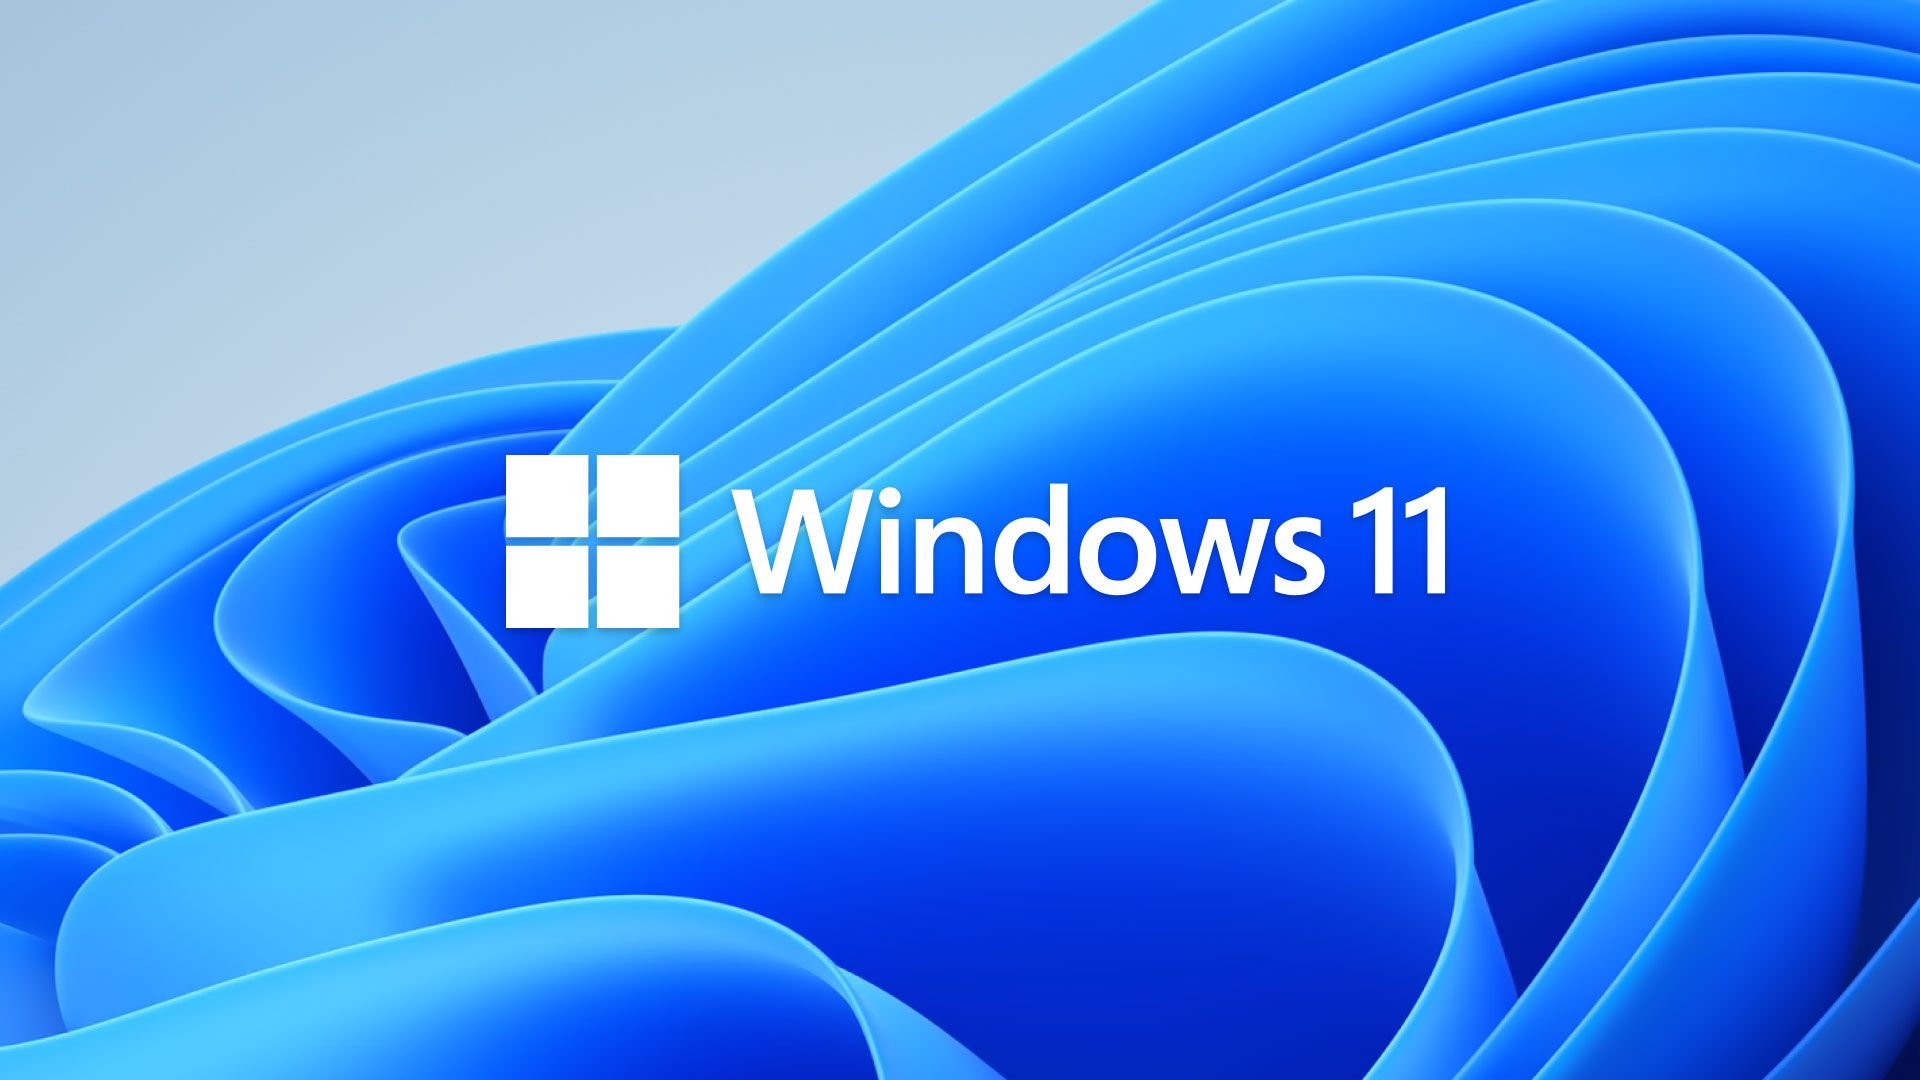 Windows 11 is available